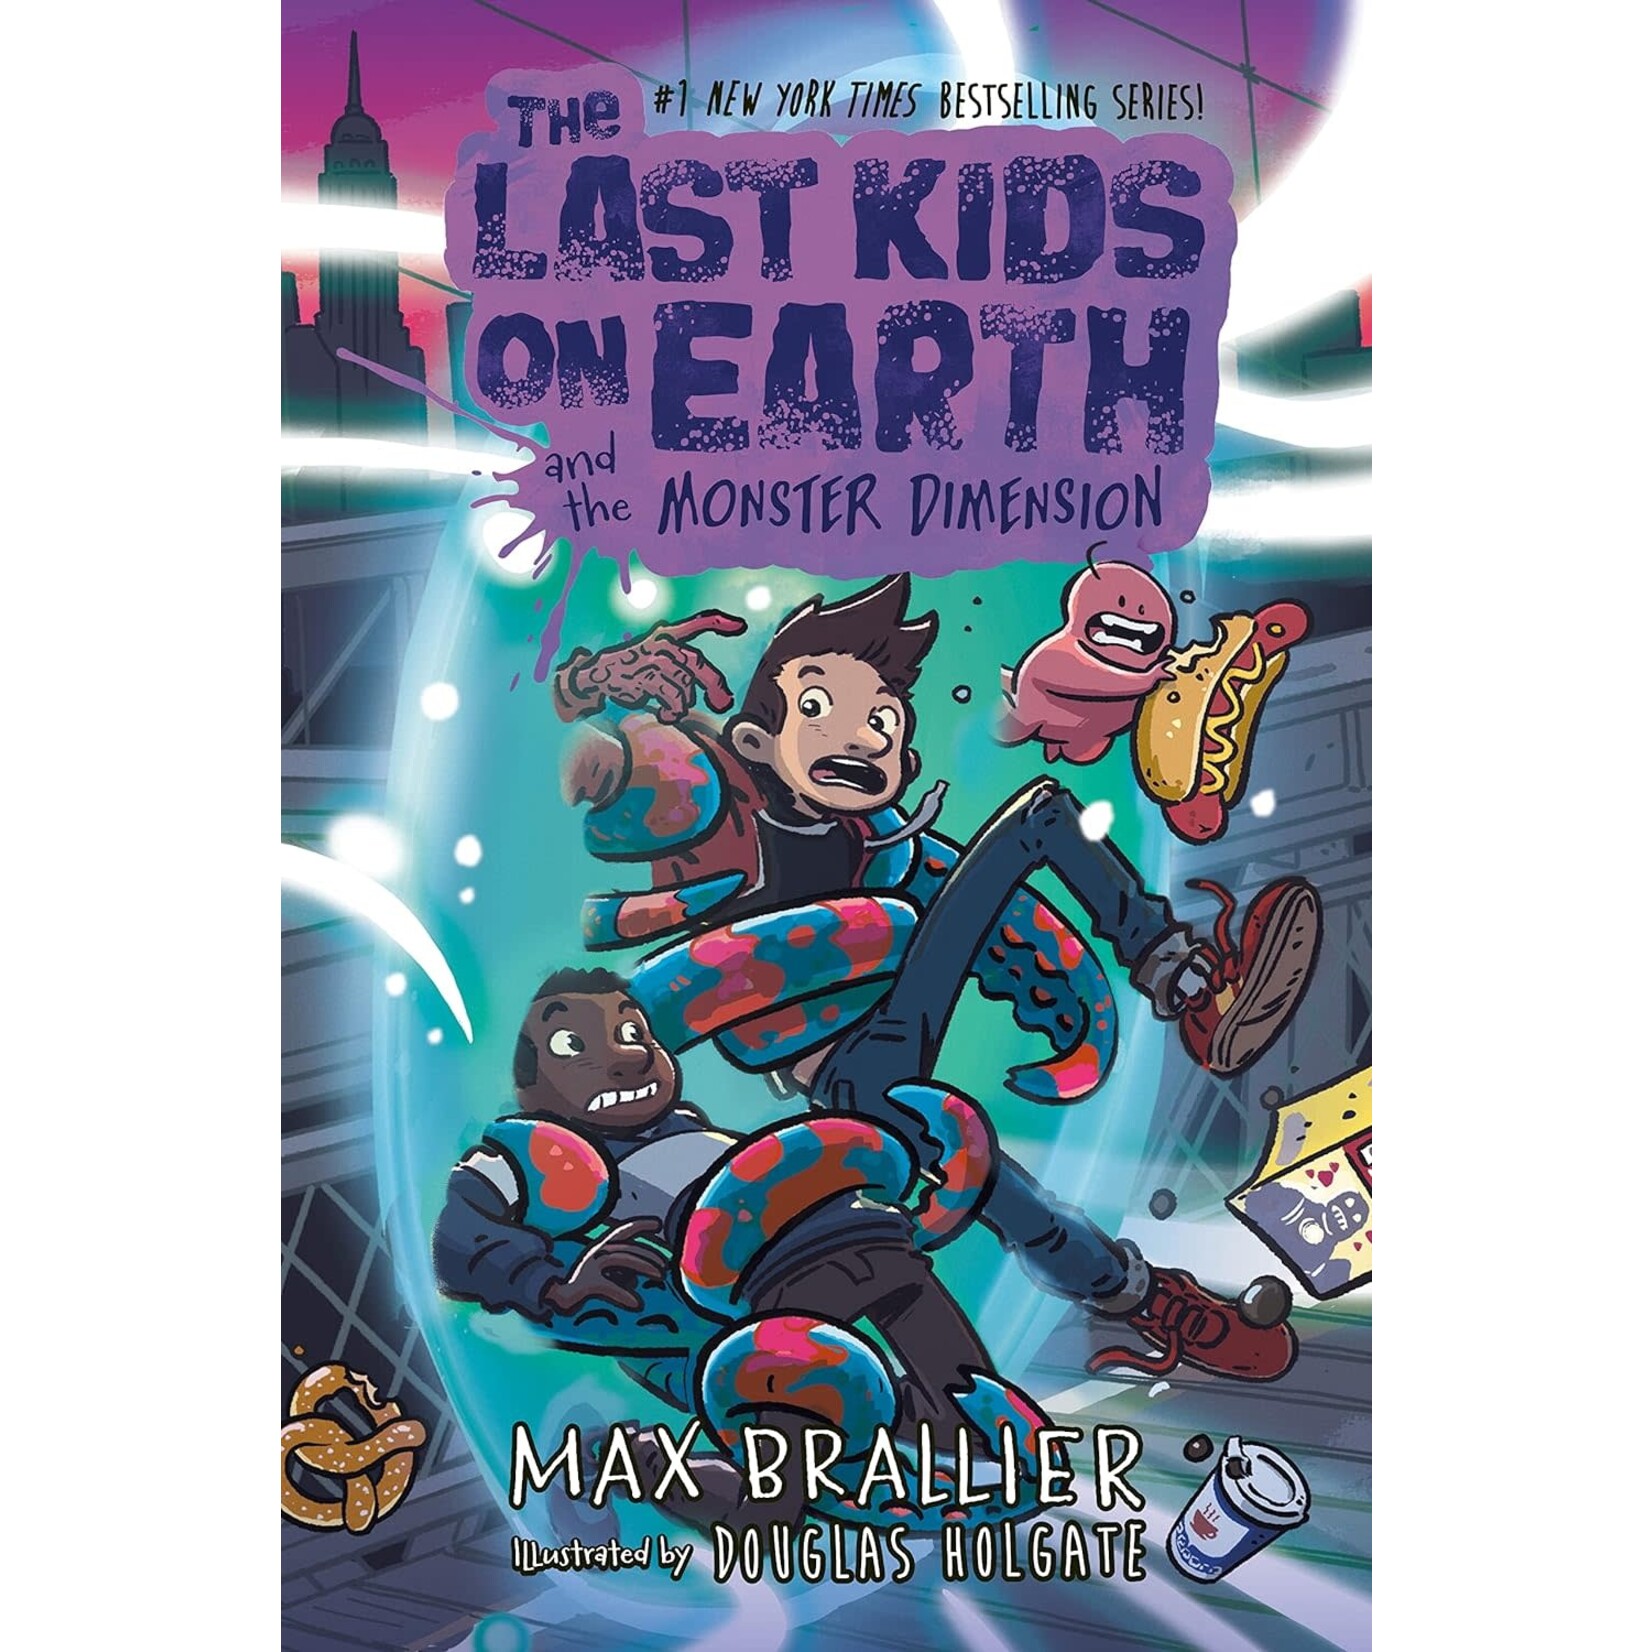 The Last Kids on Earth and the Monster Dimension (#9)